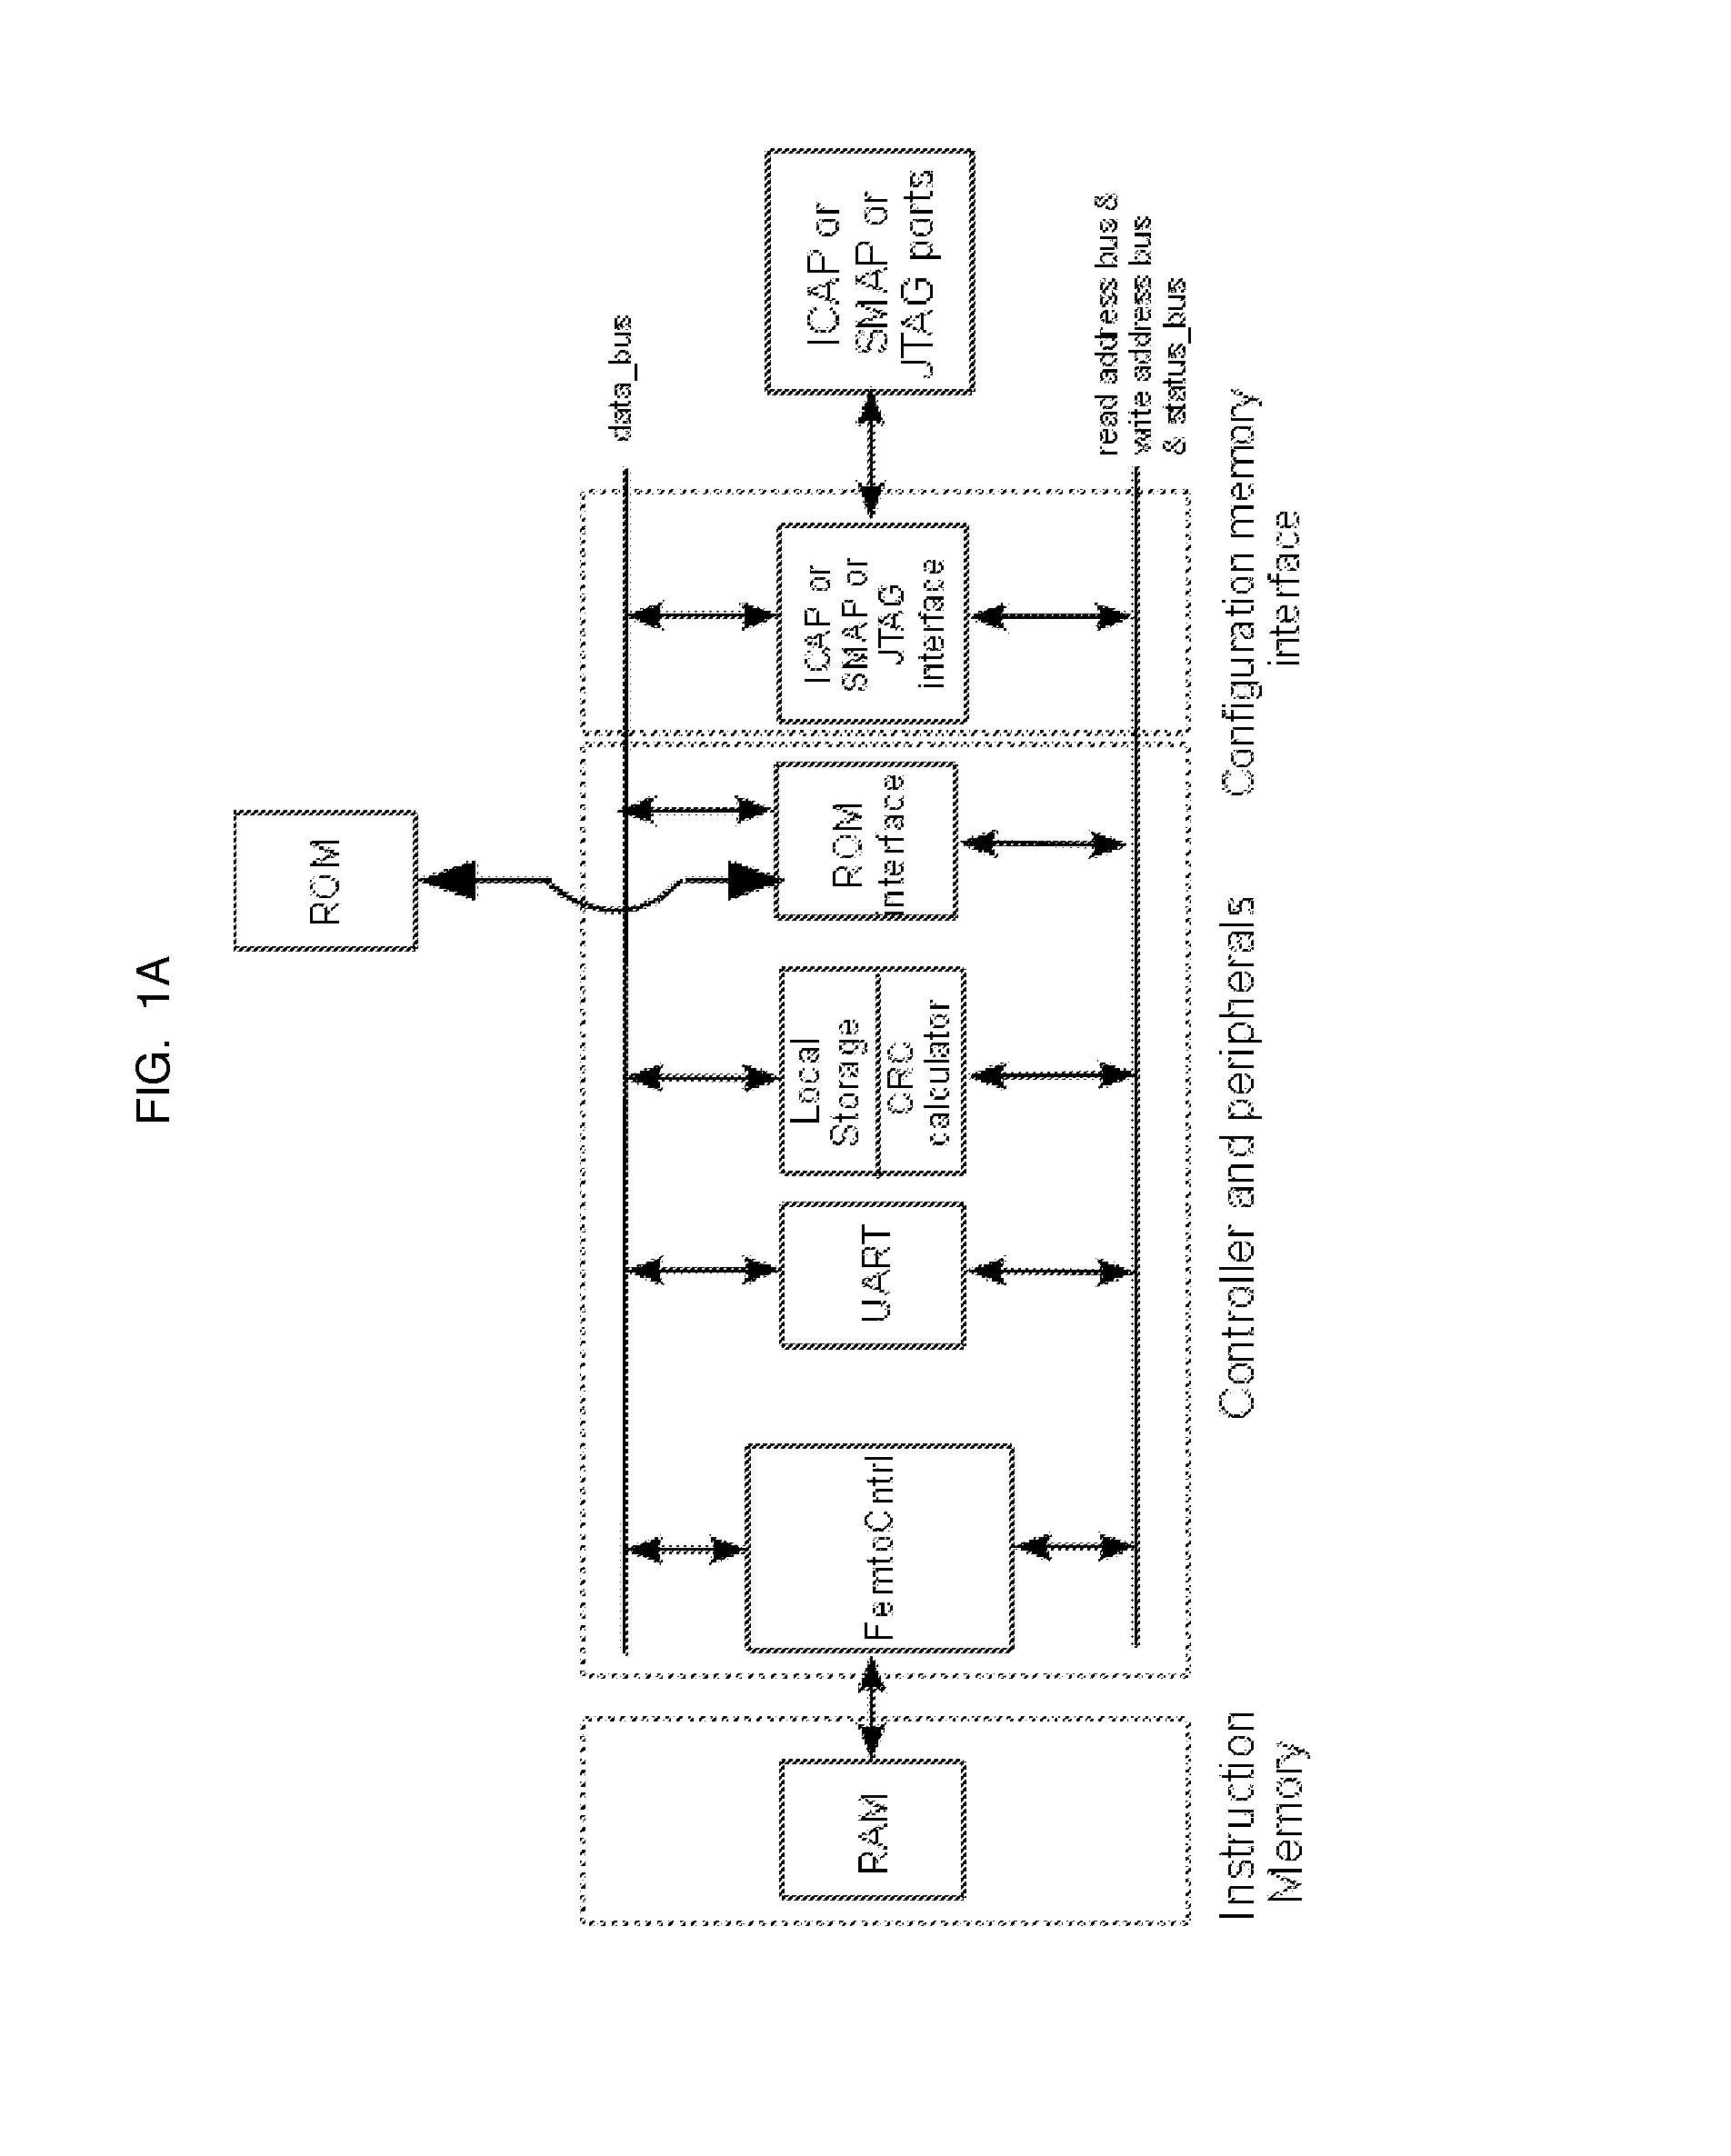 Method and architecture for performing scrubbing of an FPGA's configuration memory